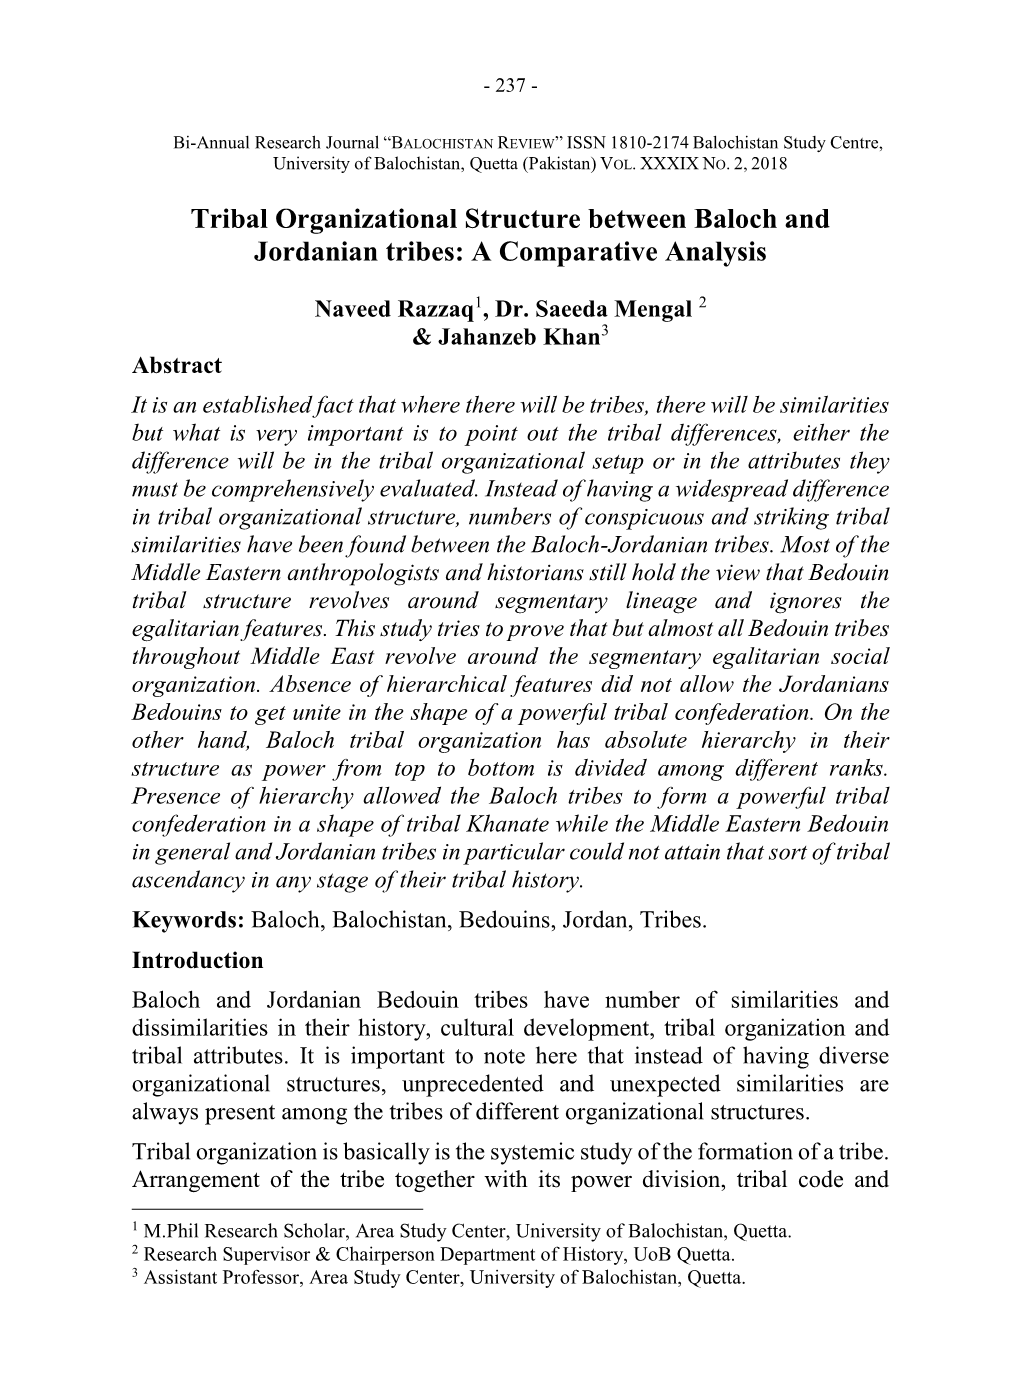 Tribal Organizational Structure Between Baloch and Jordanian Tribes: a Comparative Analysis